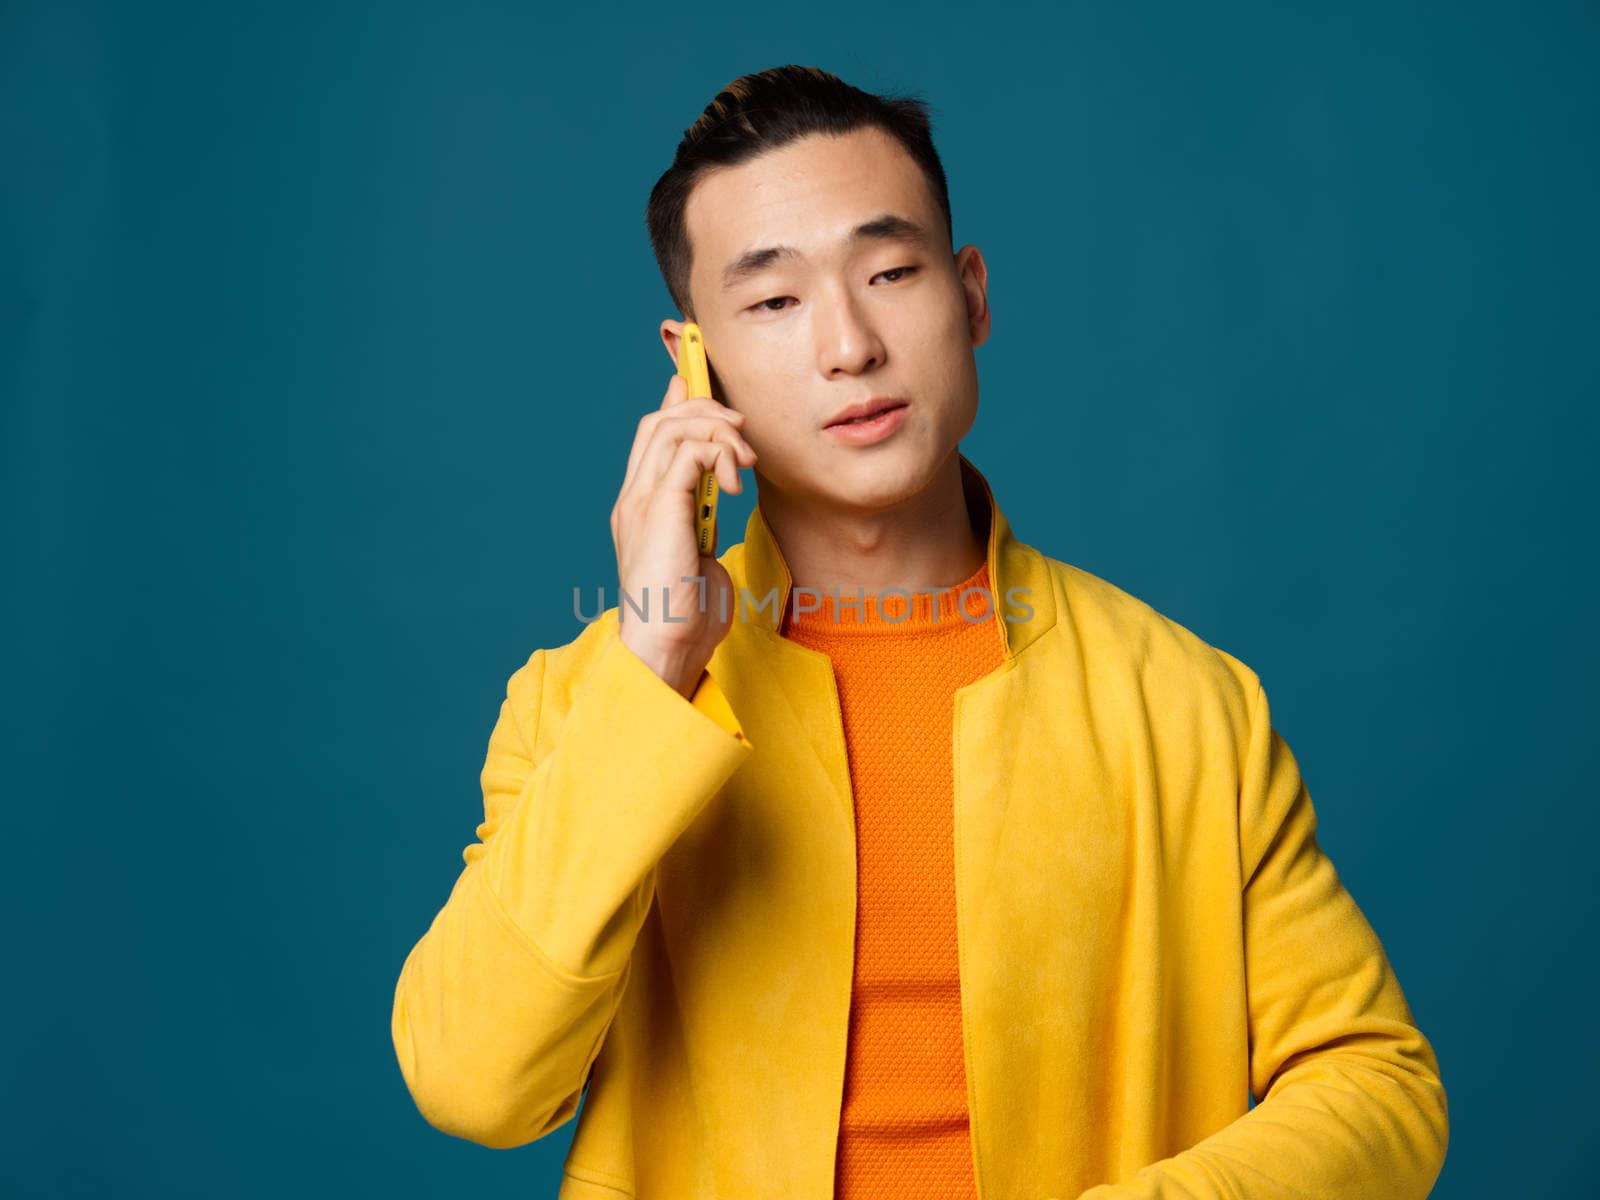 A handsome Korean man in a yellow jacket on a blue background with a phone in his hands by SHOTPRIME